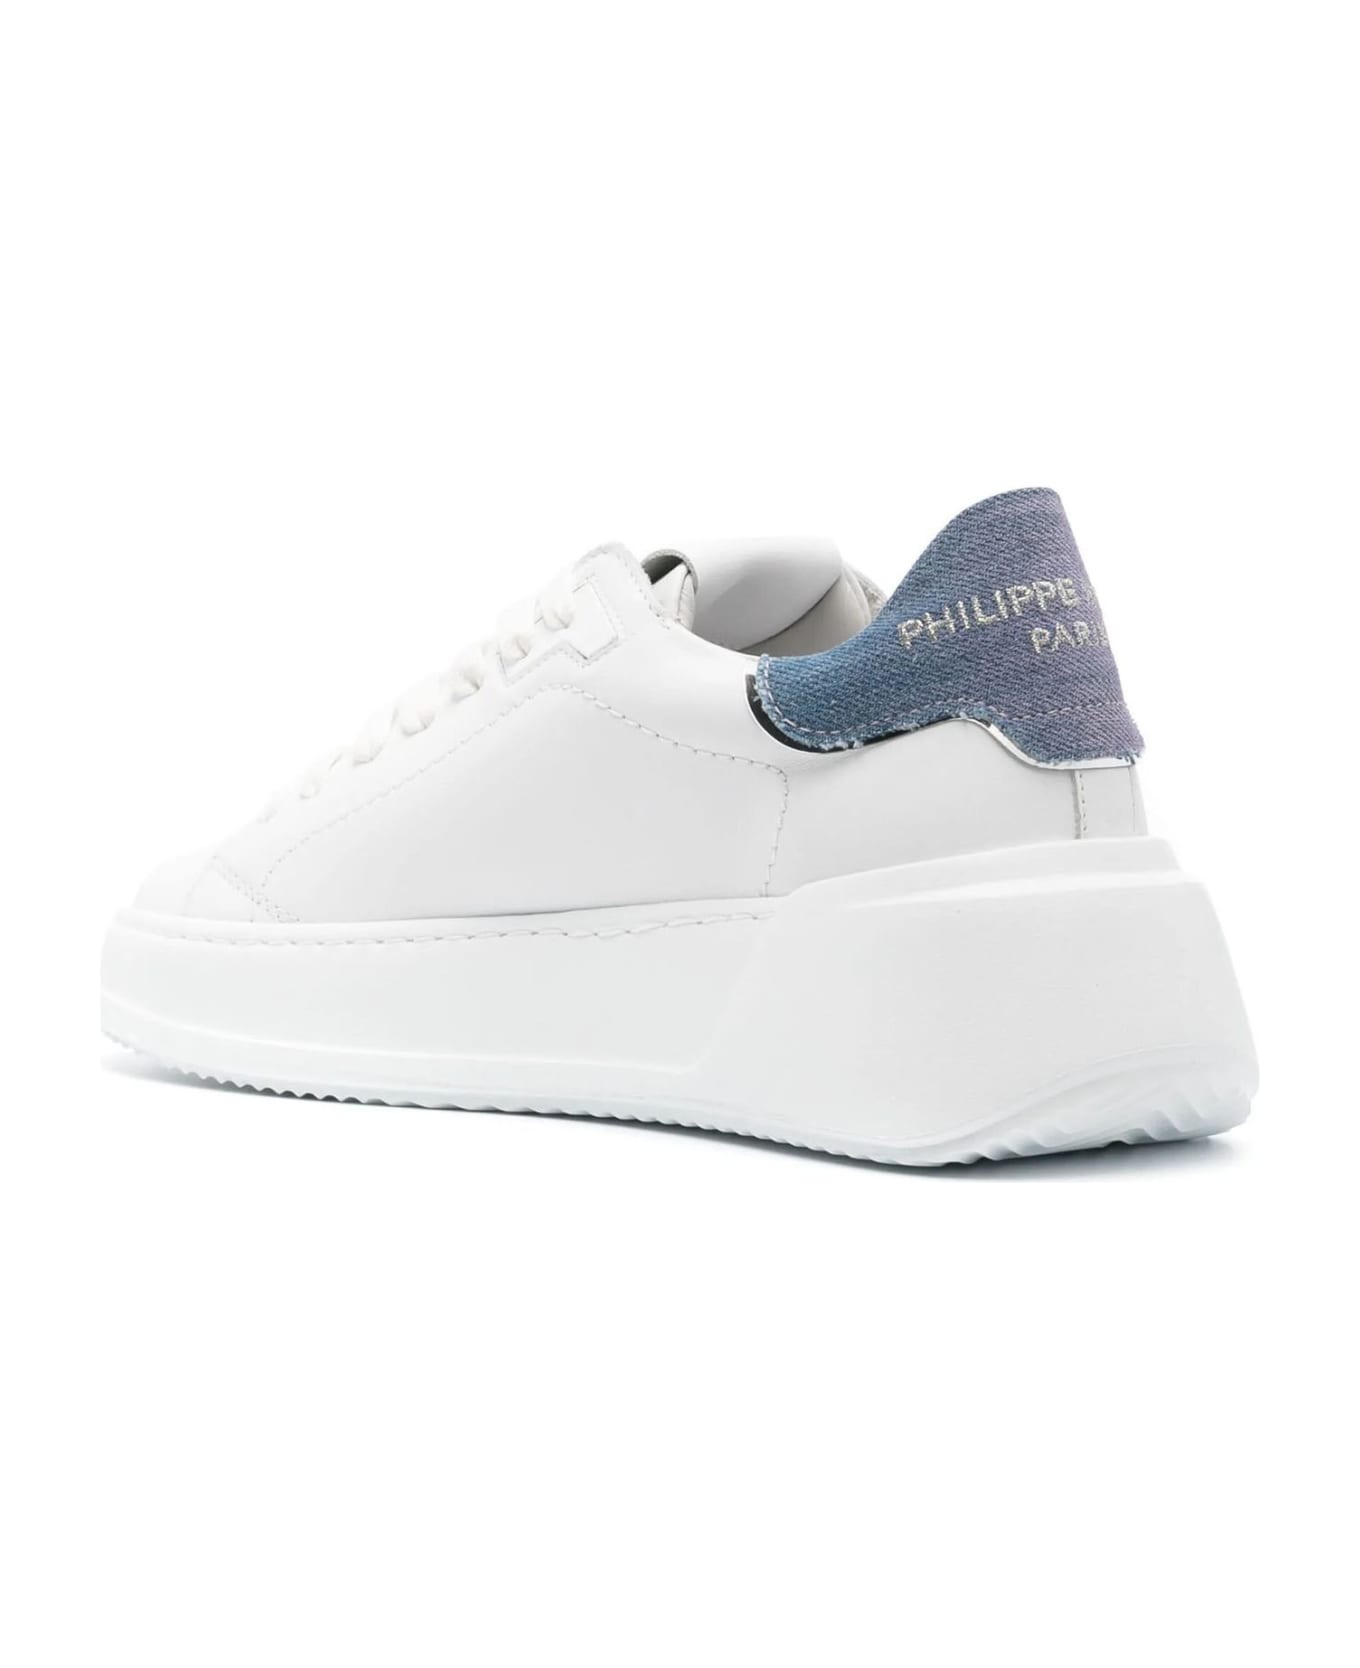 Philippe Model Tres Temple Sneaker White And Light Blue - White